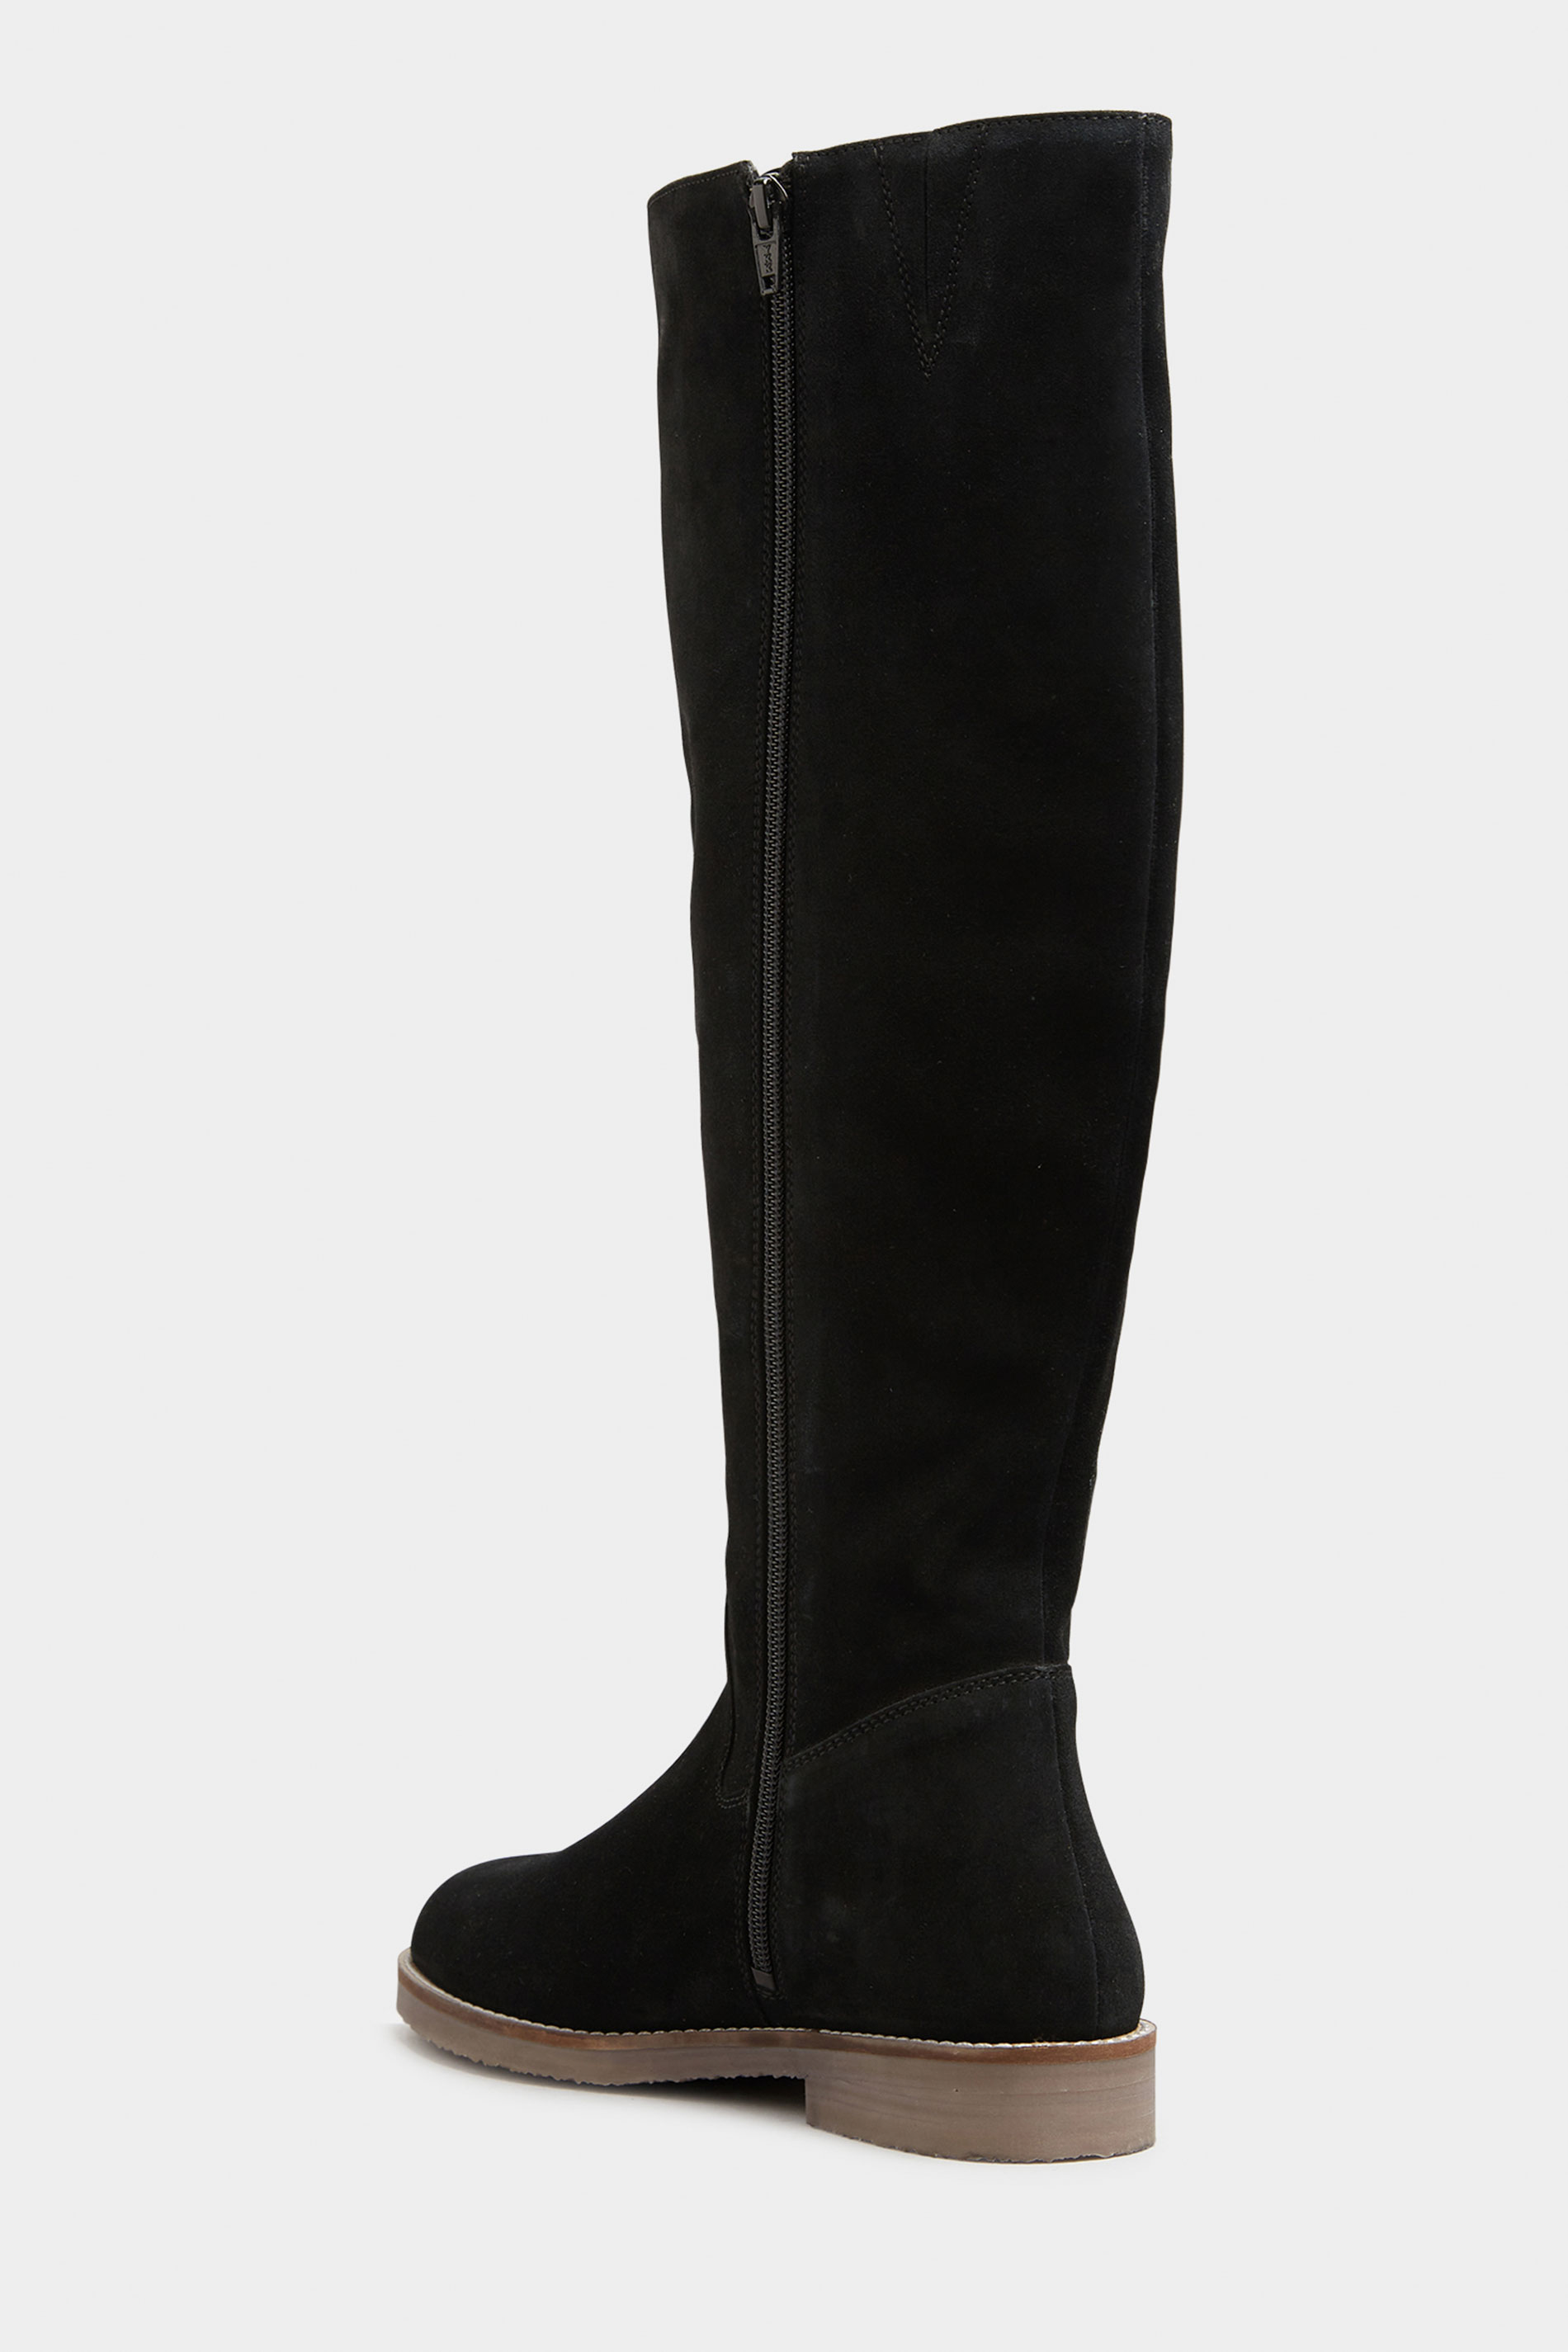 LTS Black Suede Knee High Boots In Standard D Fit | Long Tall Sally